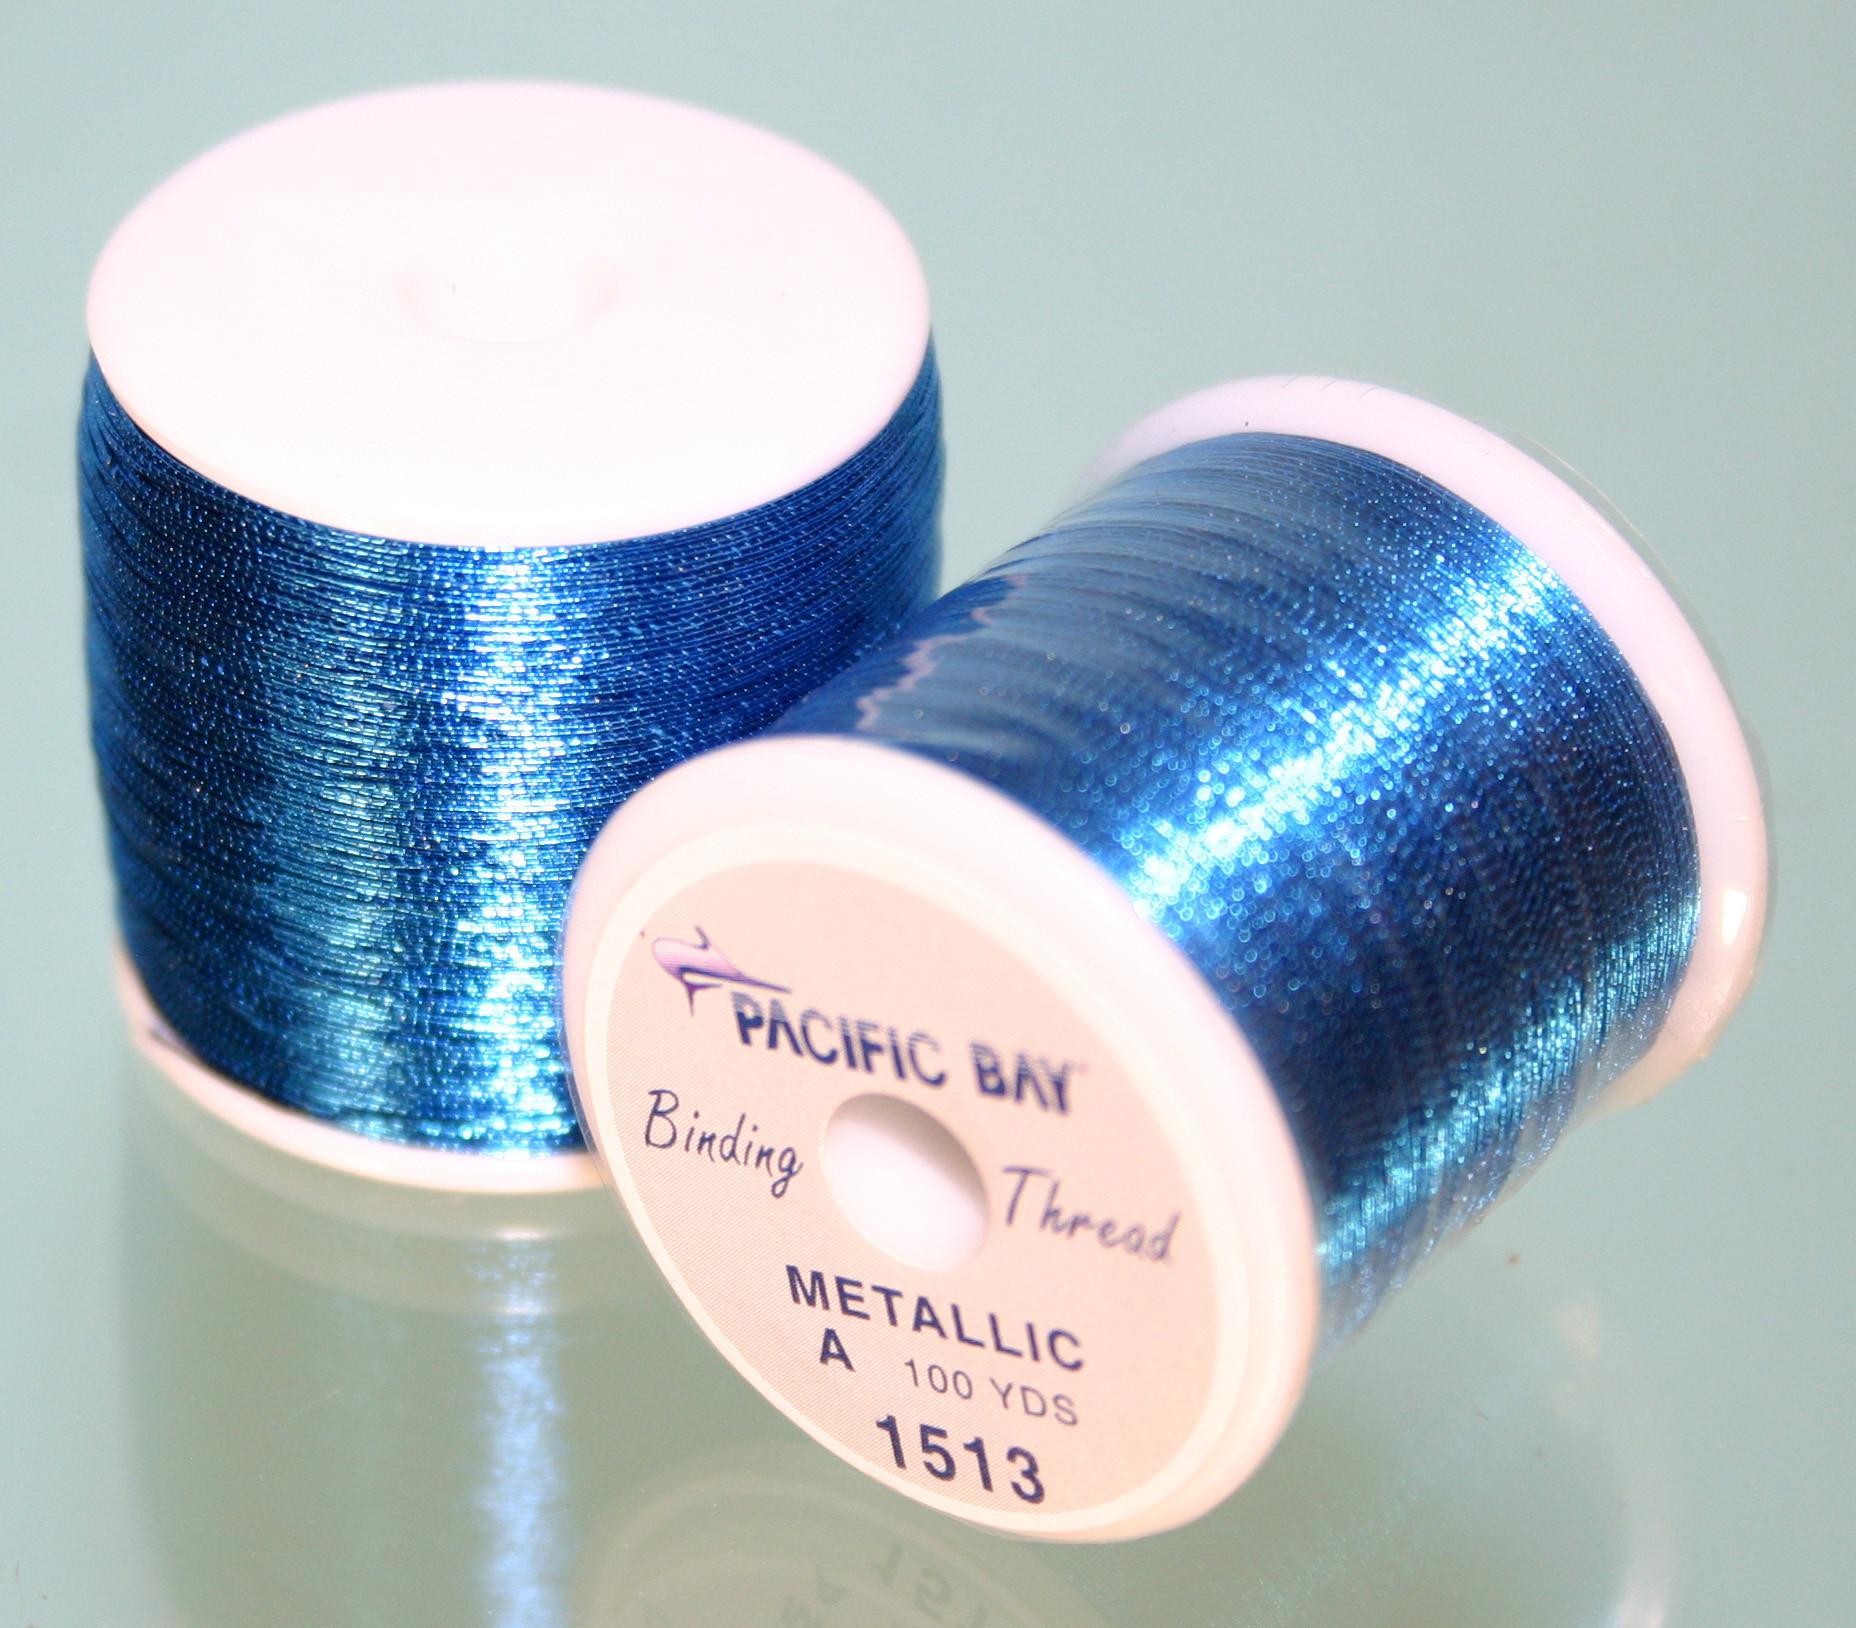 Pac bay metallic fishing rod whipping thread blue size A 100yds spool ultra poly 